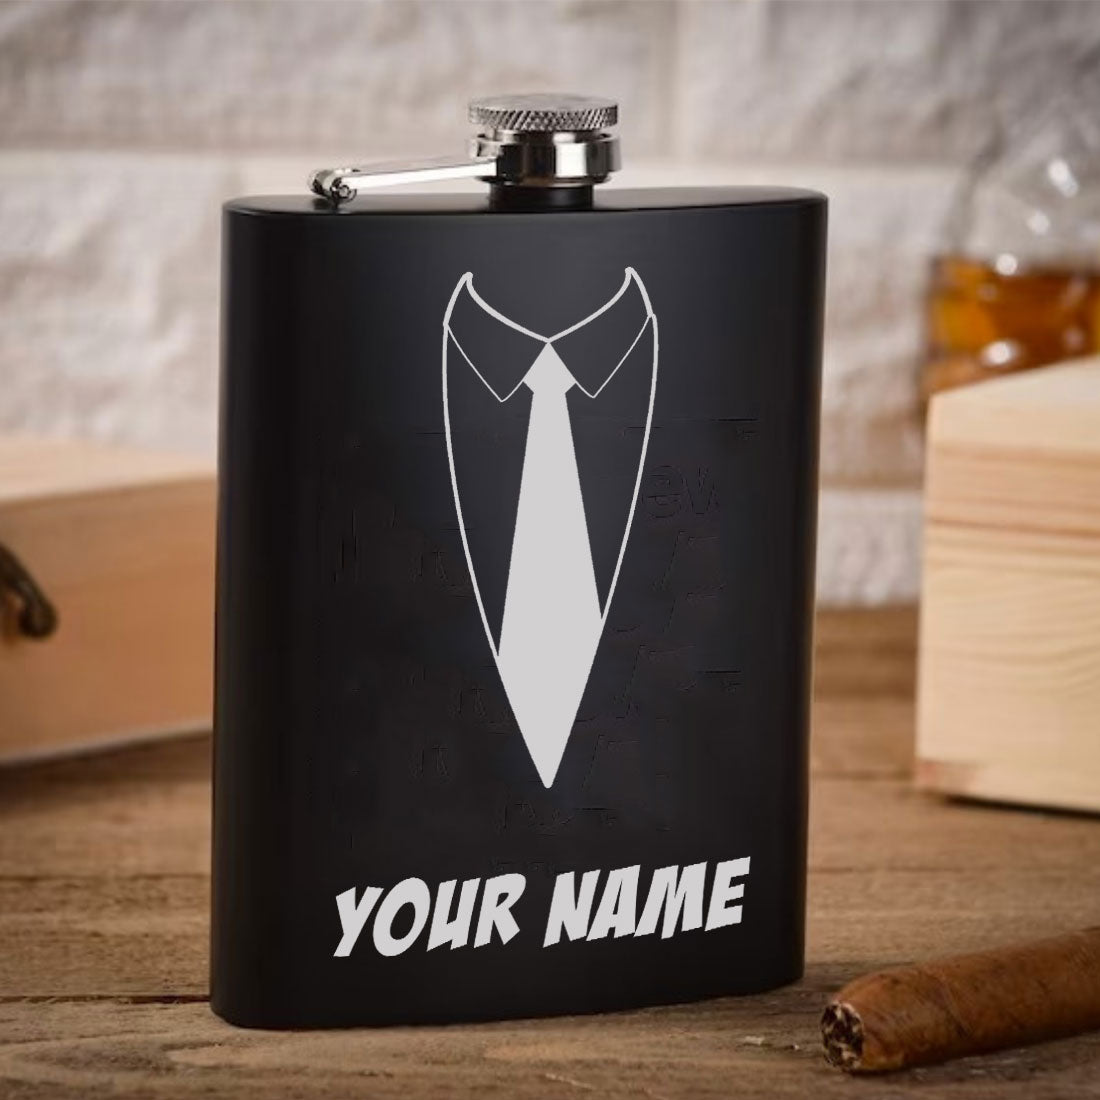 100 Meaningful Engraved Gifts for Any Occasion - xTool